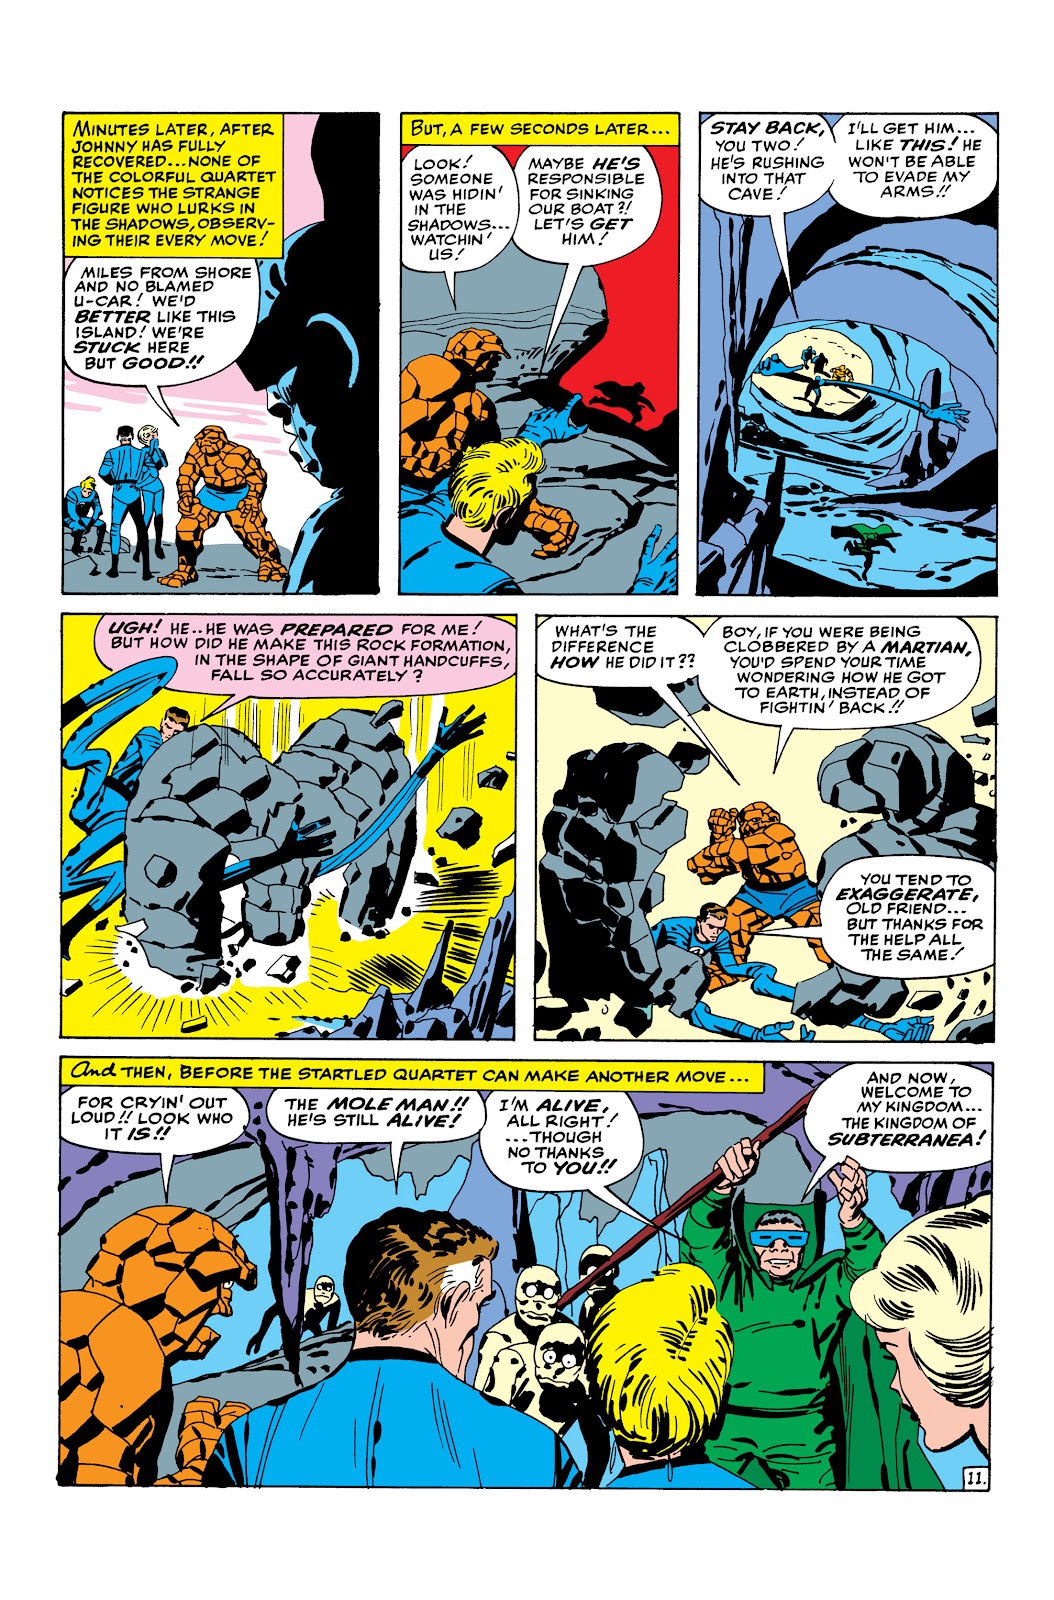 Read online Marvel Masterworks: The Fantastic Four comic - Issue # TPB 3 (Part 1) - 37